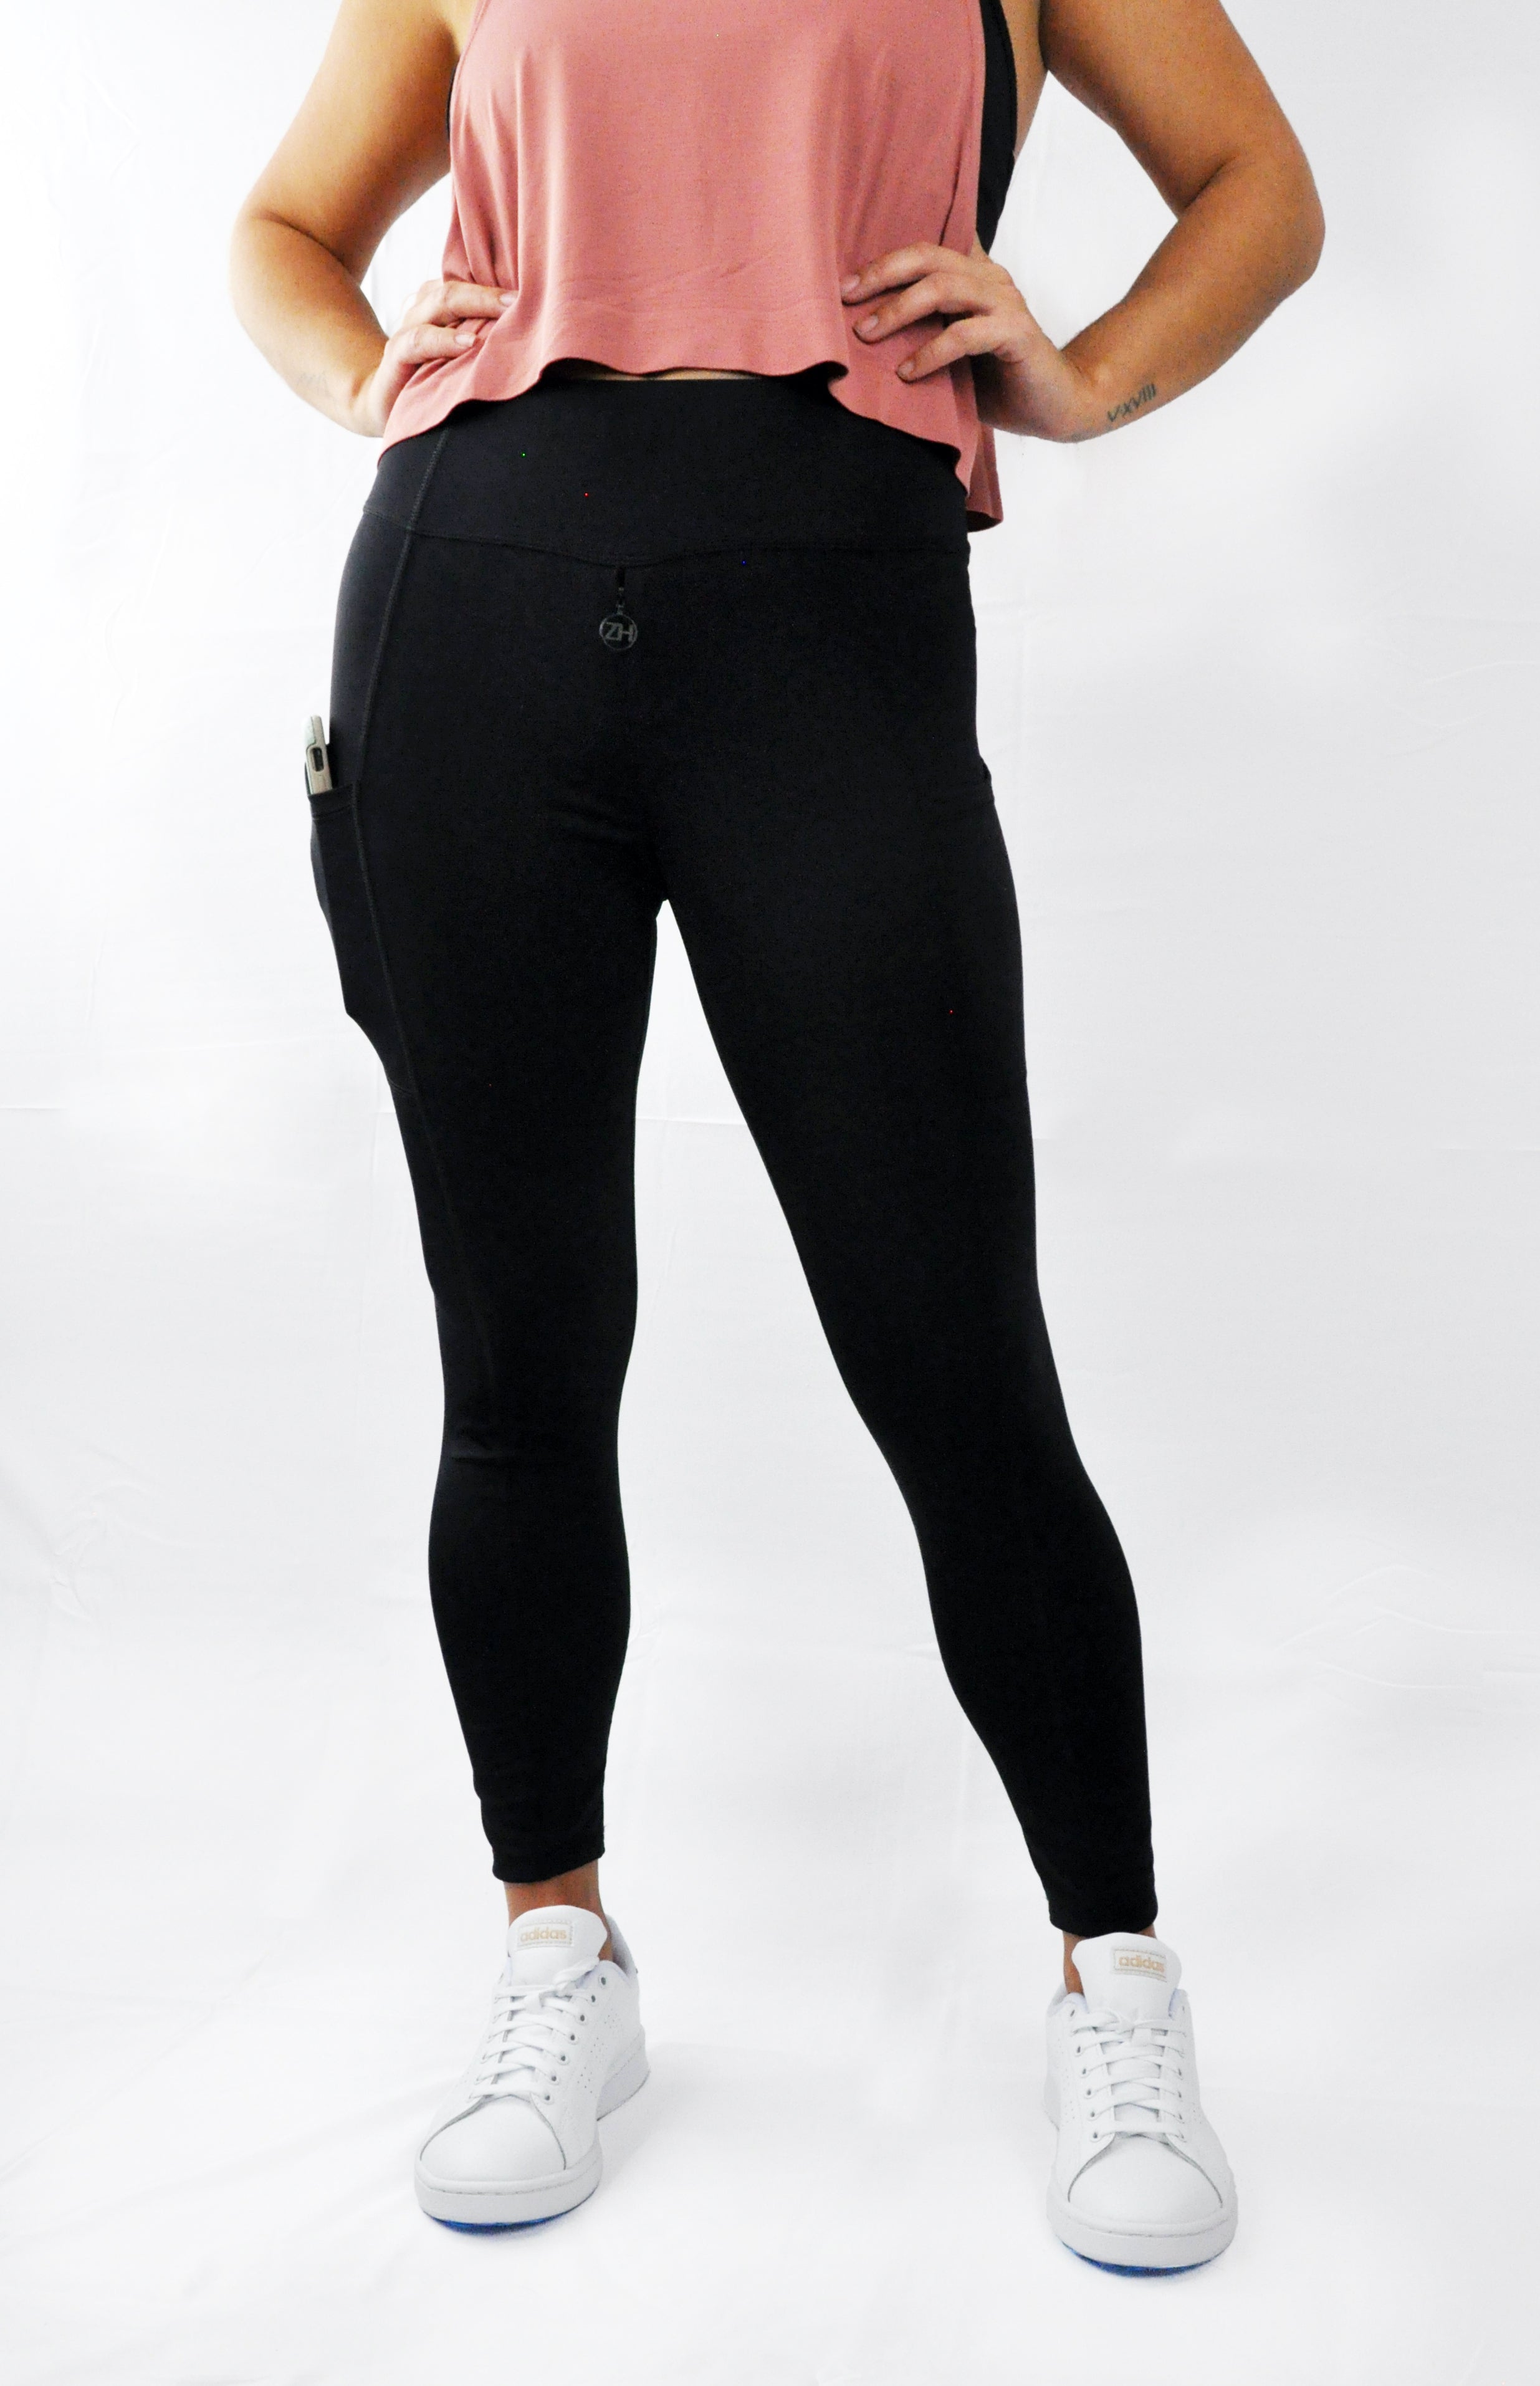 ZIPHERS Leisure by Elite Fit & Tights